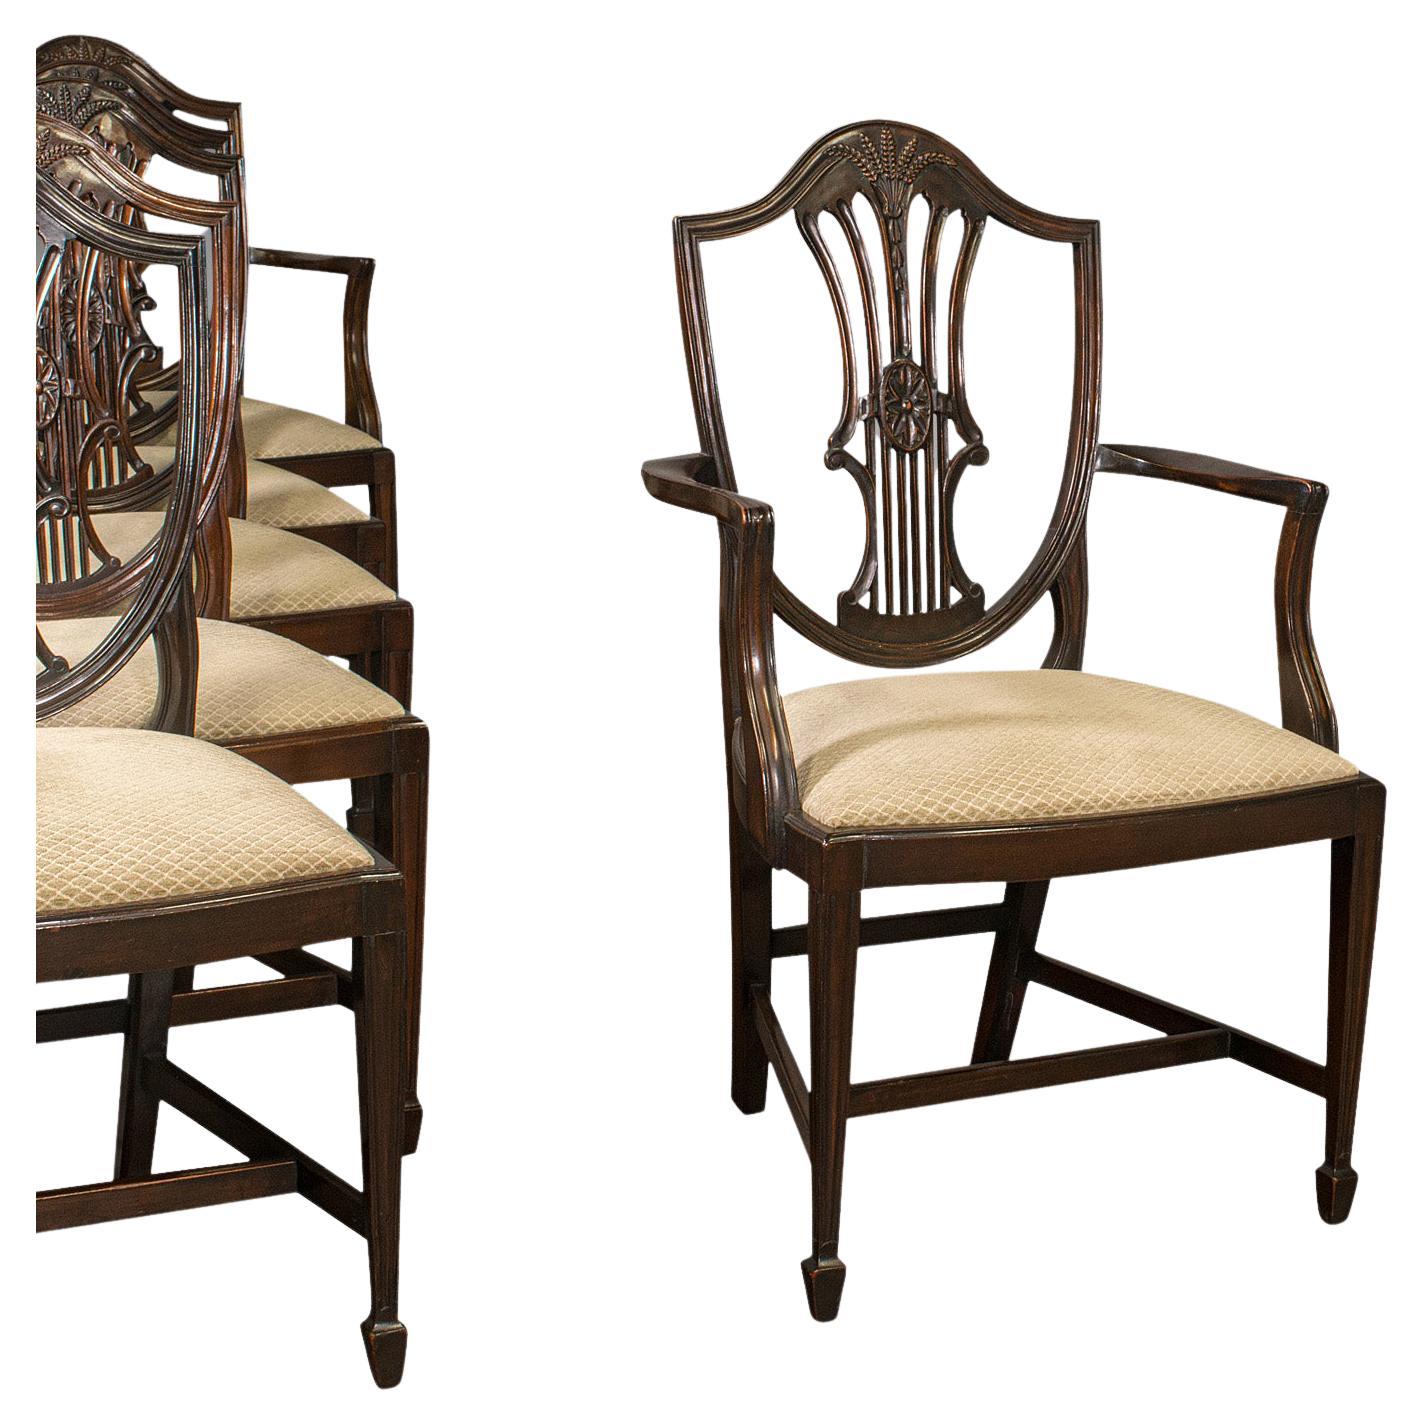 Set of 6 Antique Hepplewhite Revival Chairs, English, Dining Suite, Victorian